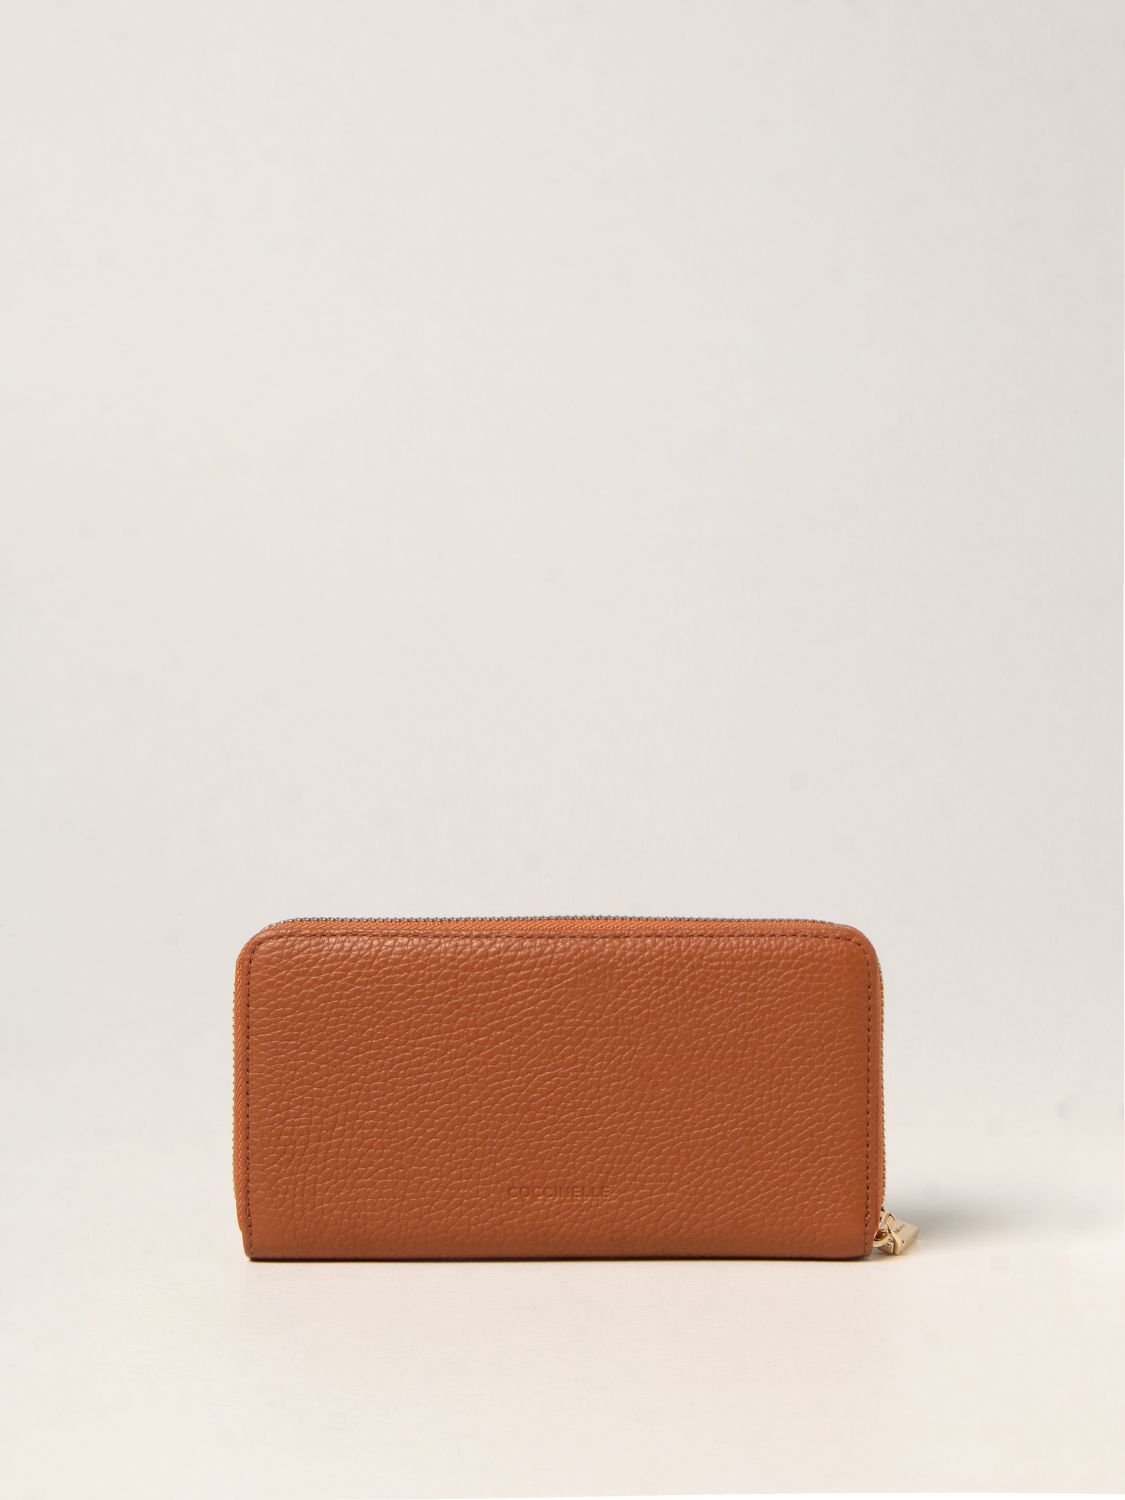 COCCINELLE: Dora wallet in grained leather - Camel | Coccinelle wallet ...